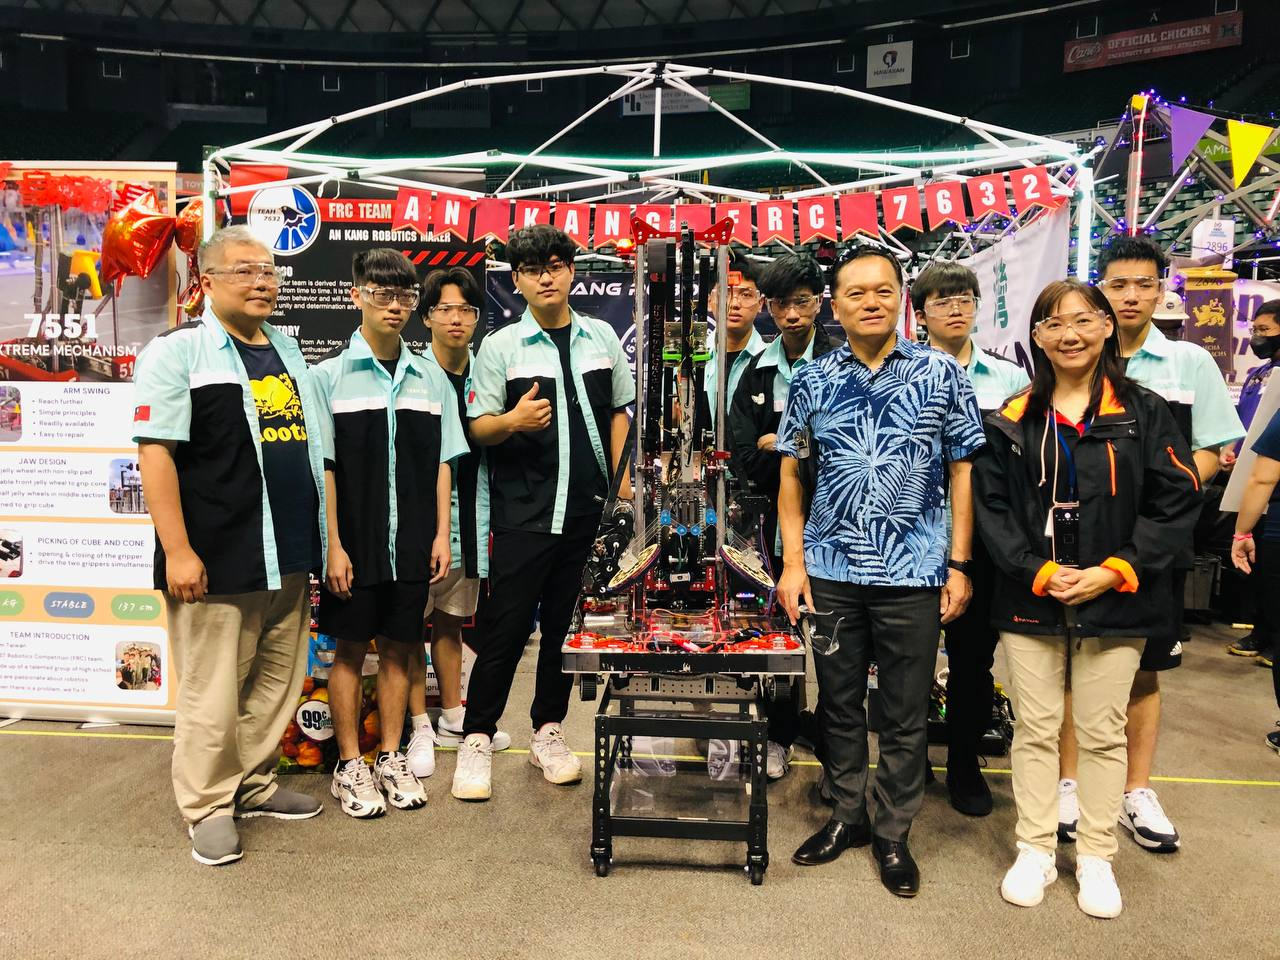 Director General Richard Lin with the delegation of New Taipei Municipal An Kang High School at the 2023 FIRST Robotics Competition (FRC), Hawaii Regional on March 23, 2023